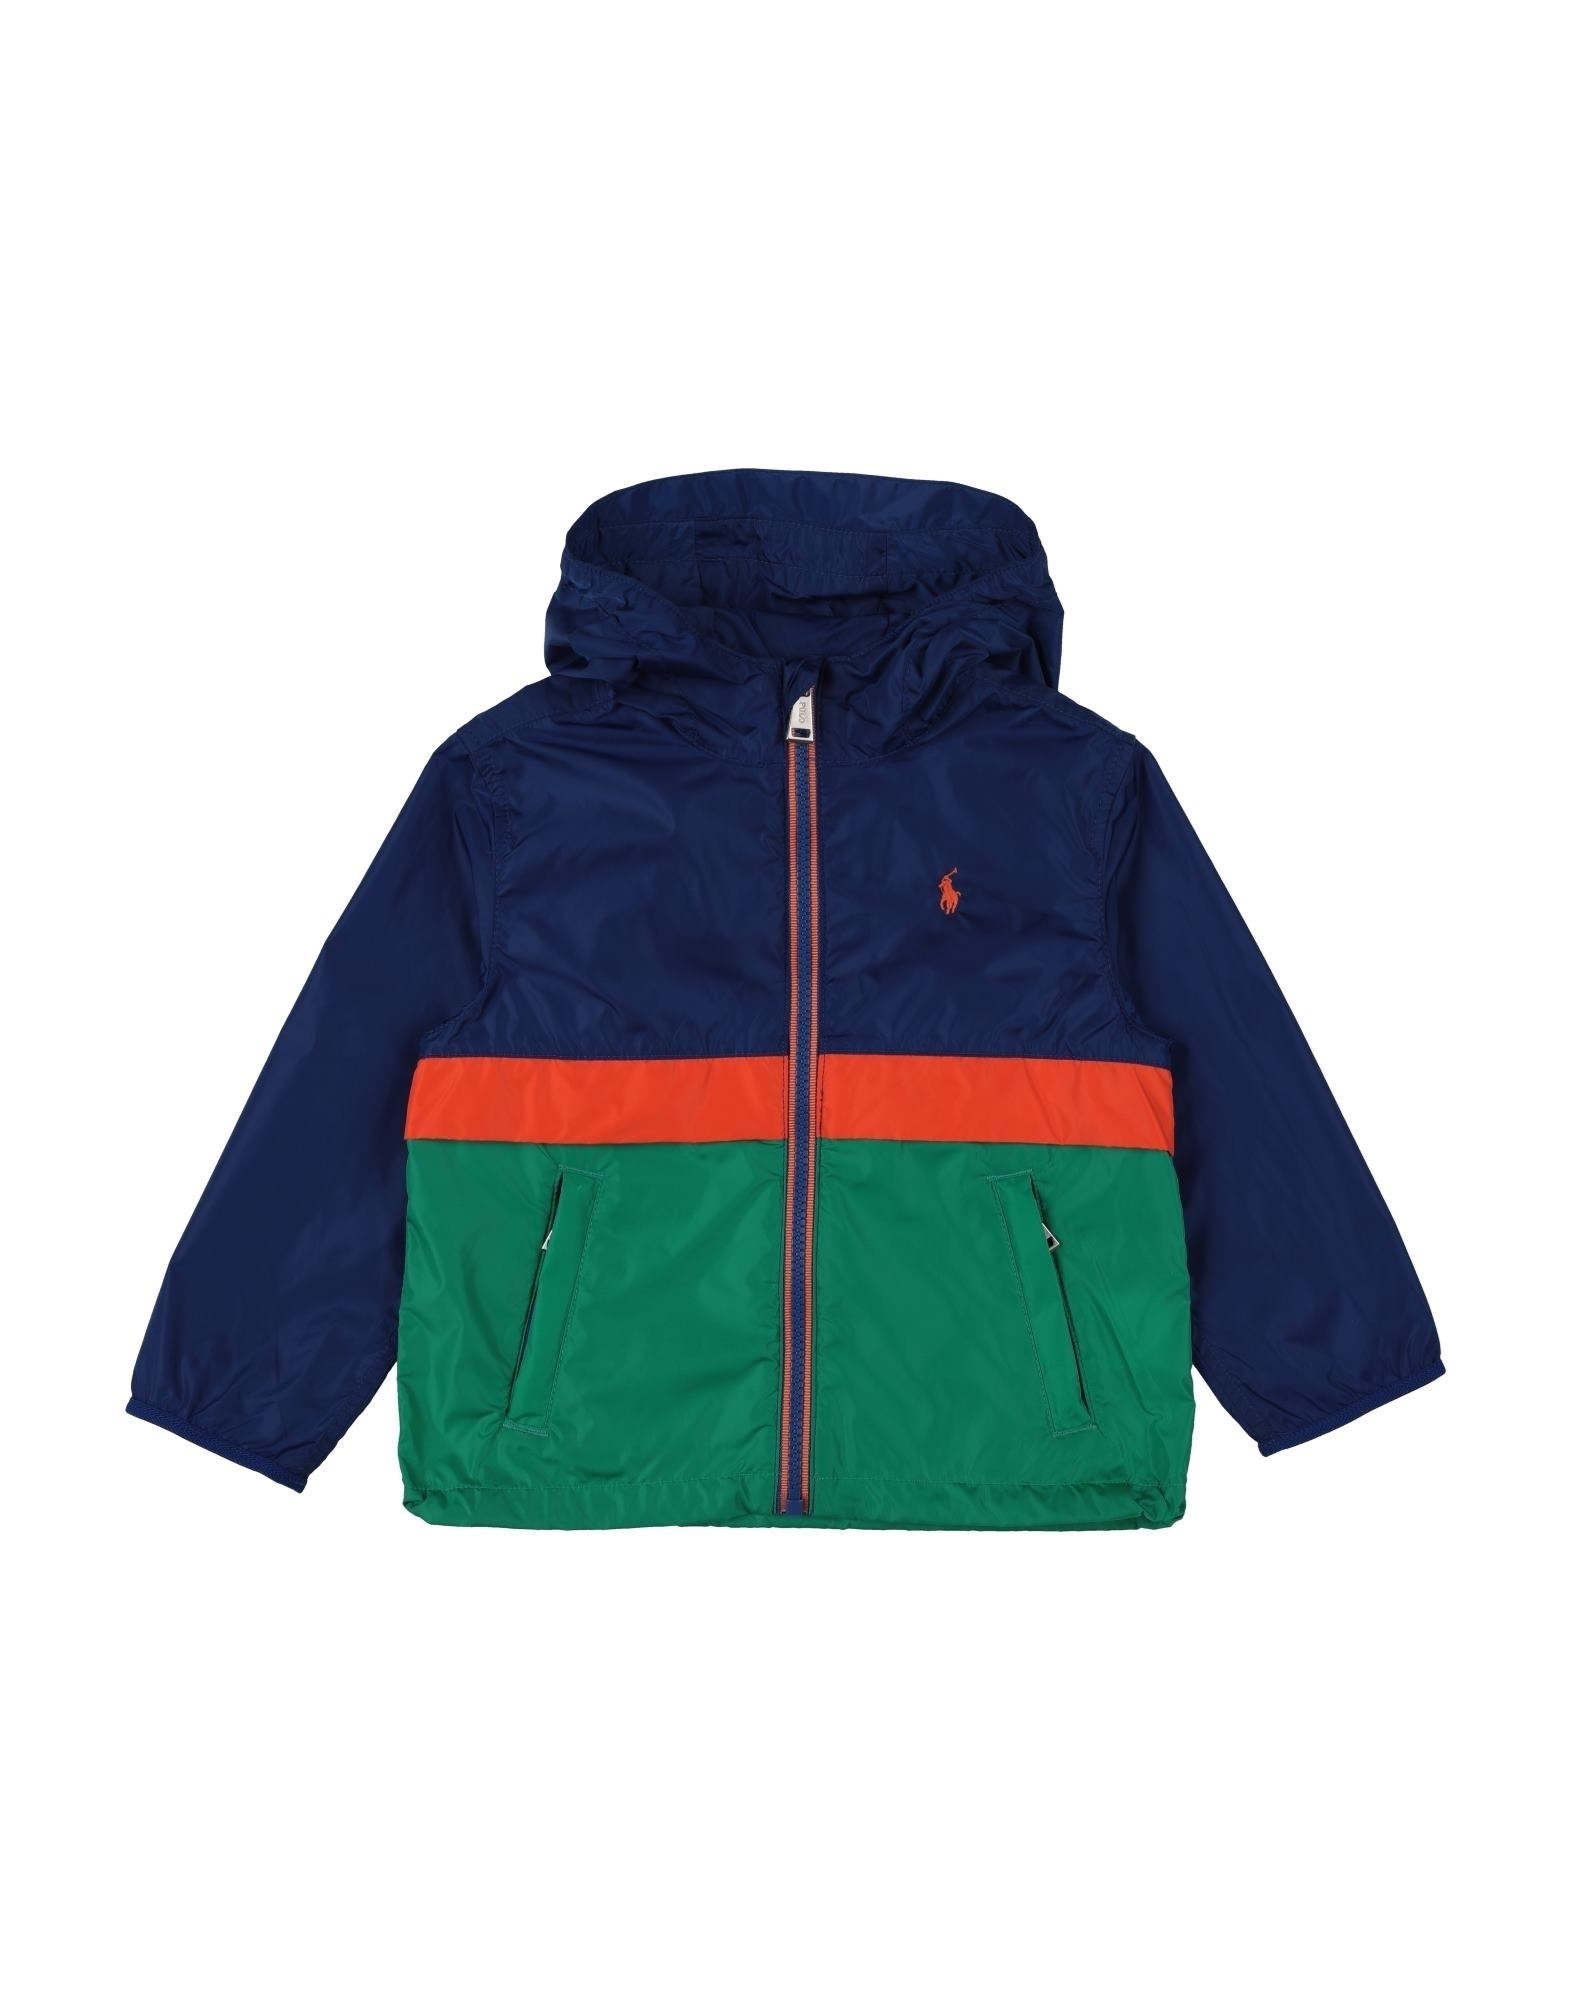 ＜YOOX＞ ★34%OFF！RALPH LAUREN ボーイズ 3-8 歳 ブルゾン ブルー 3 ナイロン 100% Color-Blocked Hooded Jacket画像